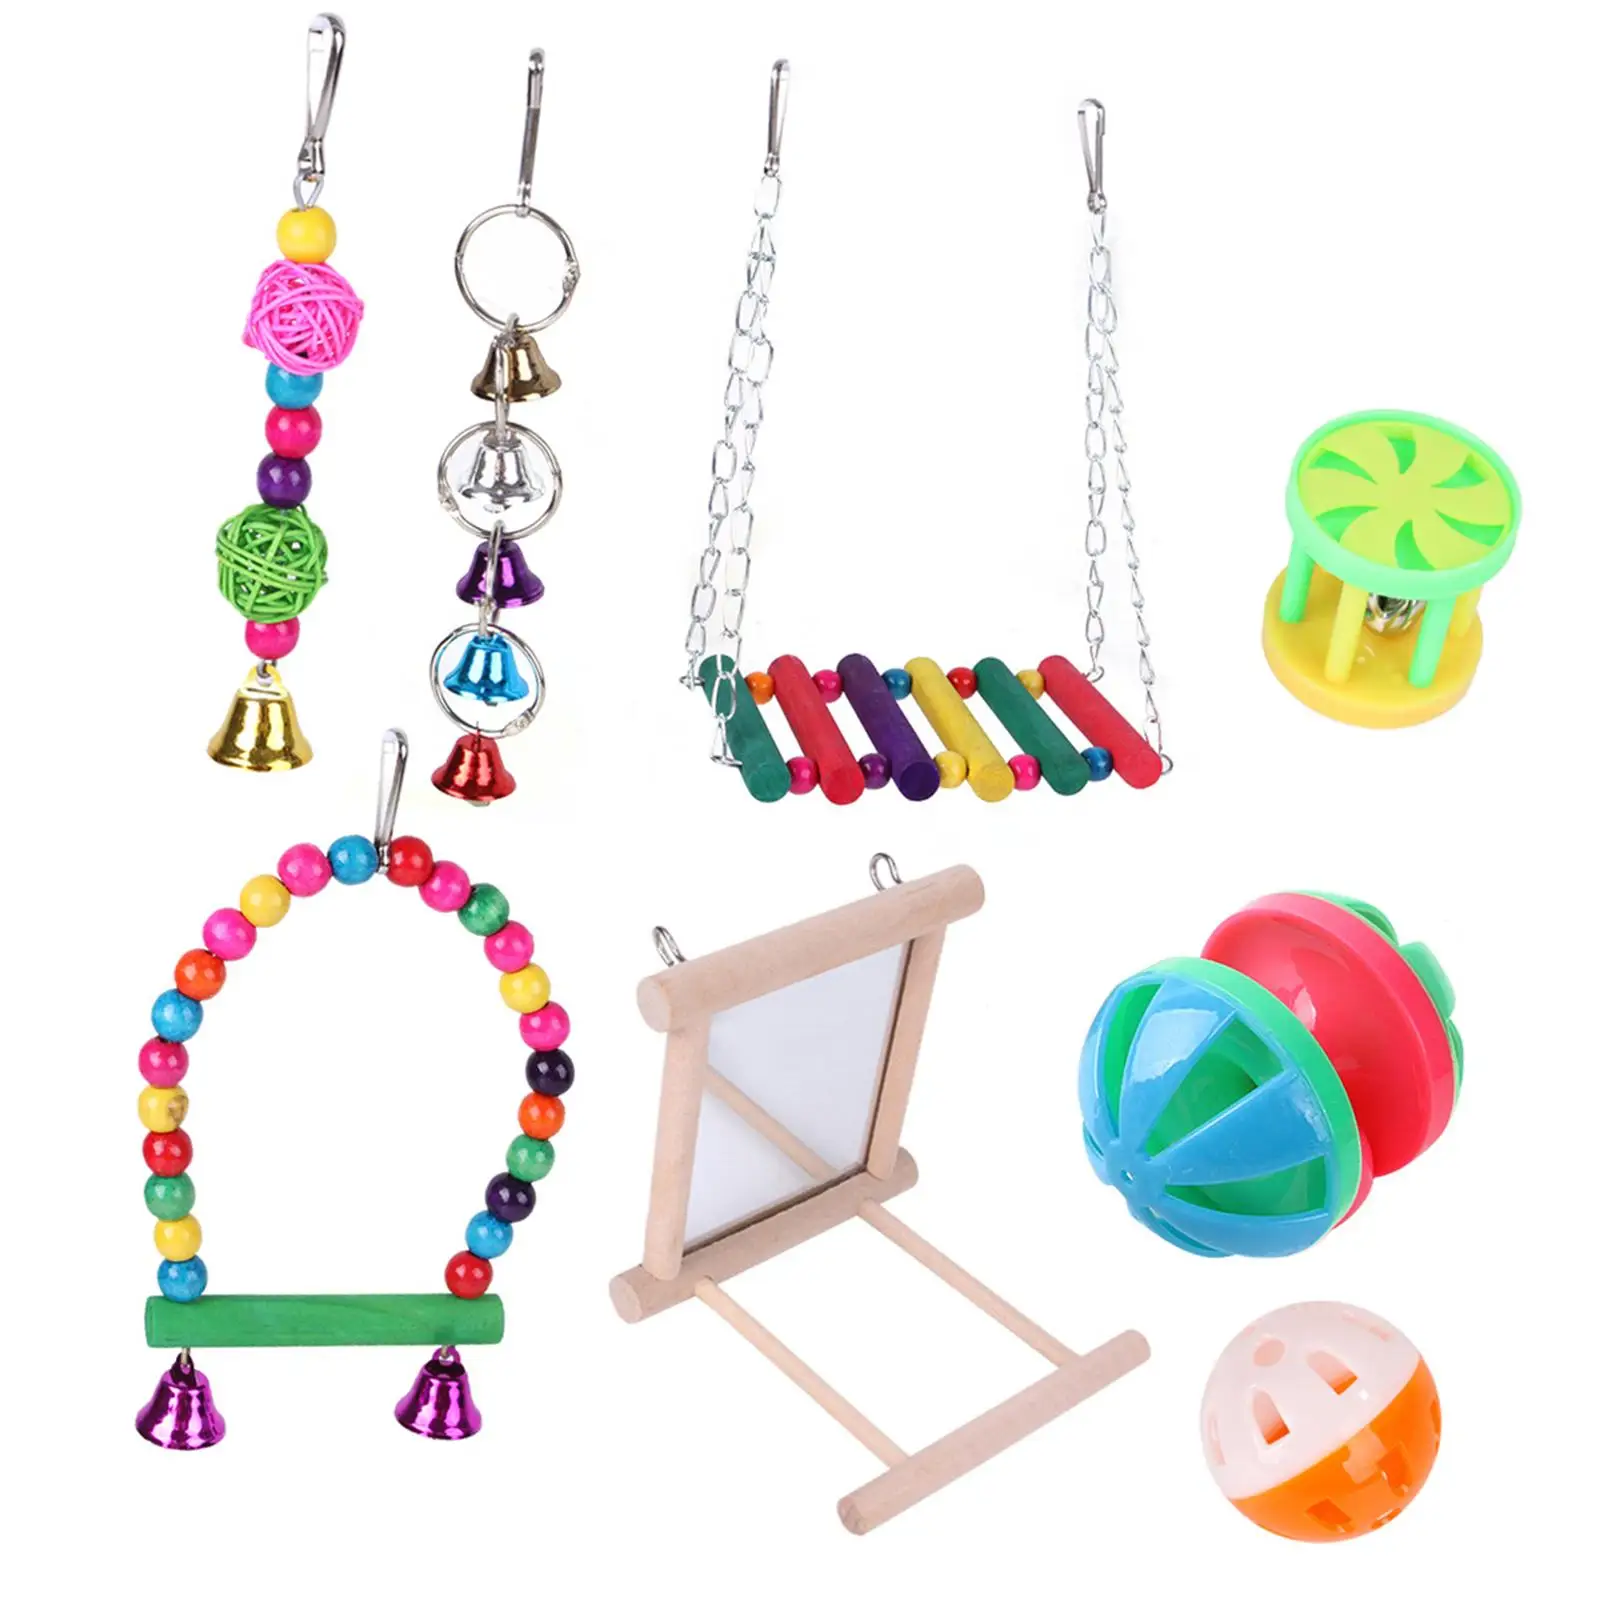 8x Parrot Toys Kit Climbing Cage Toys Hanging Bell Bead Bird Swing Toy for Conures Hamster Chinchilla Rabbit Budgie Cockatiels